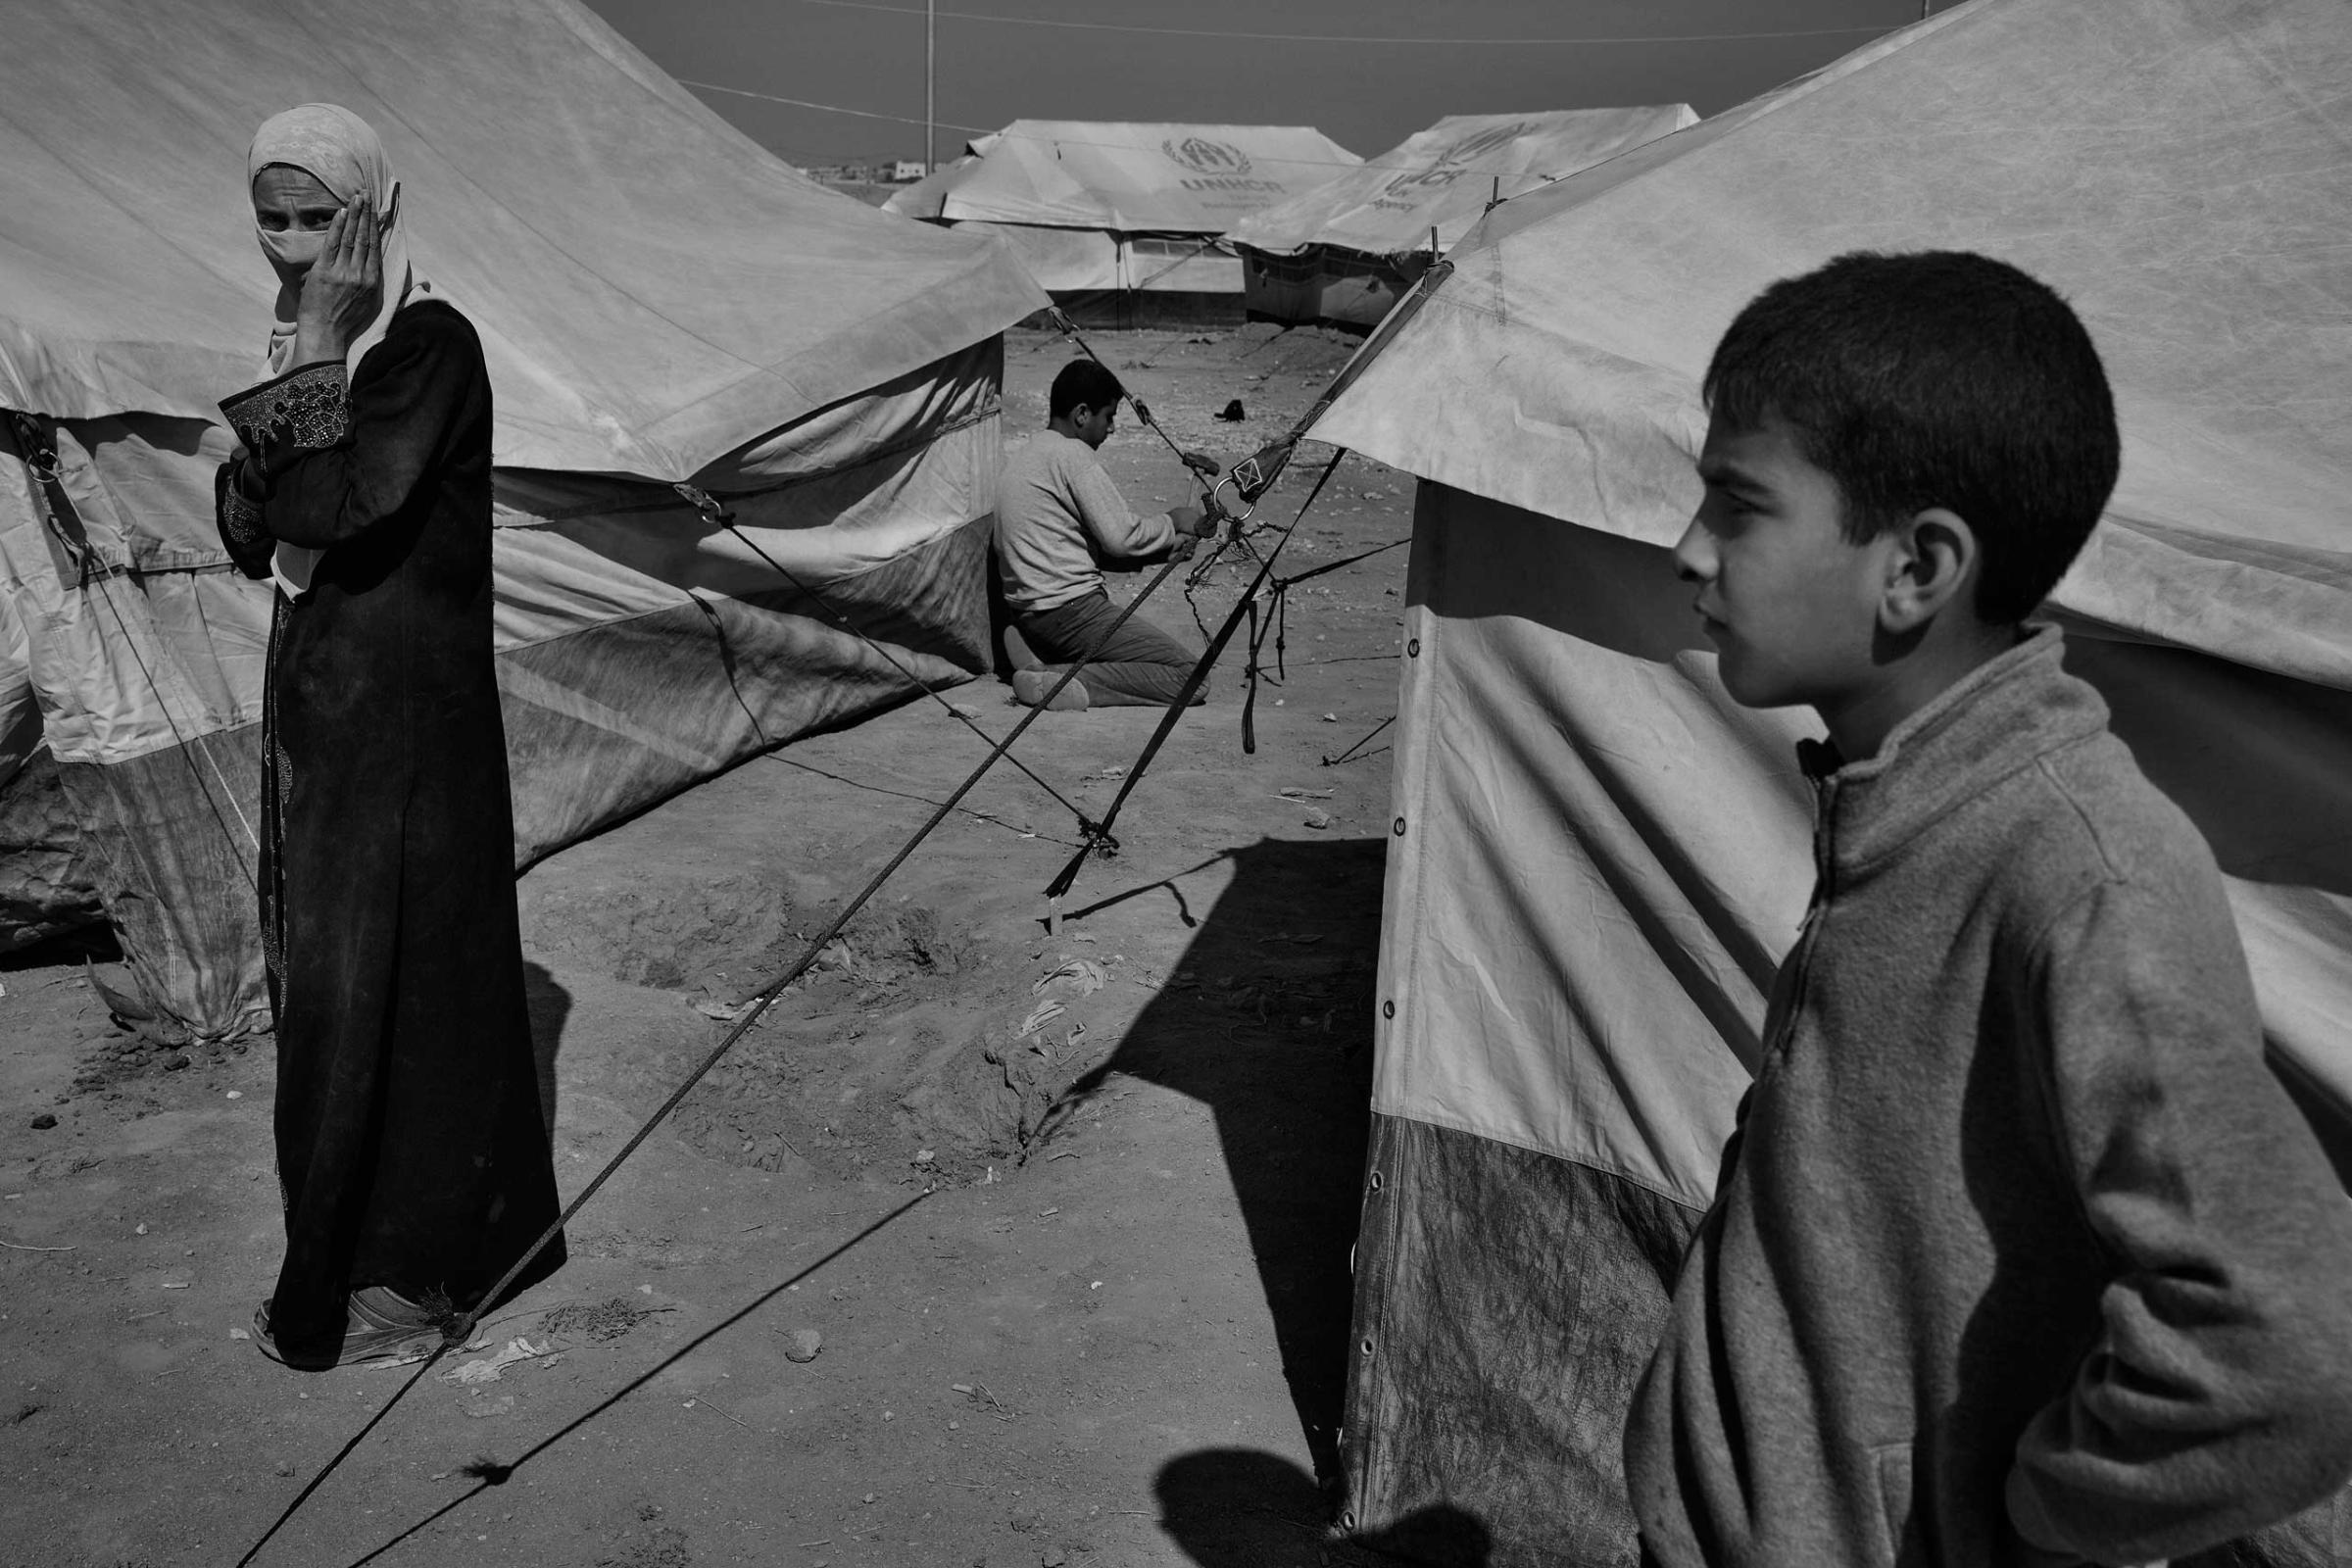 December 2013. Za'atari refugee camp, Jordan. New arrivals from Syria setting up tents supplied by the United Nations High Commissioner for Refugees.